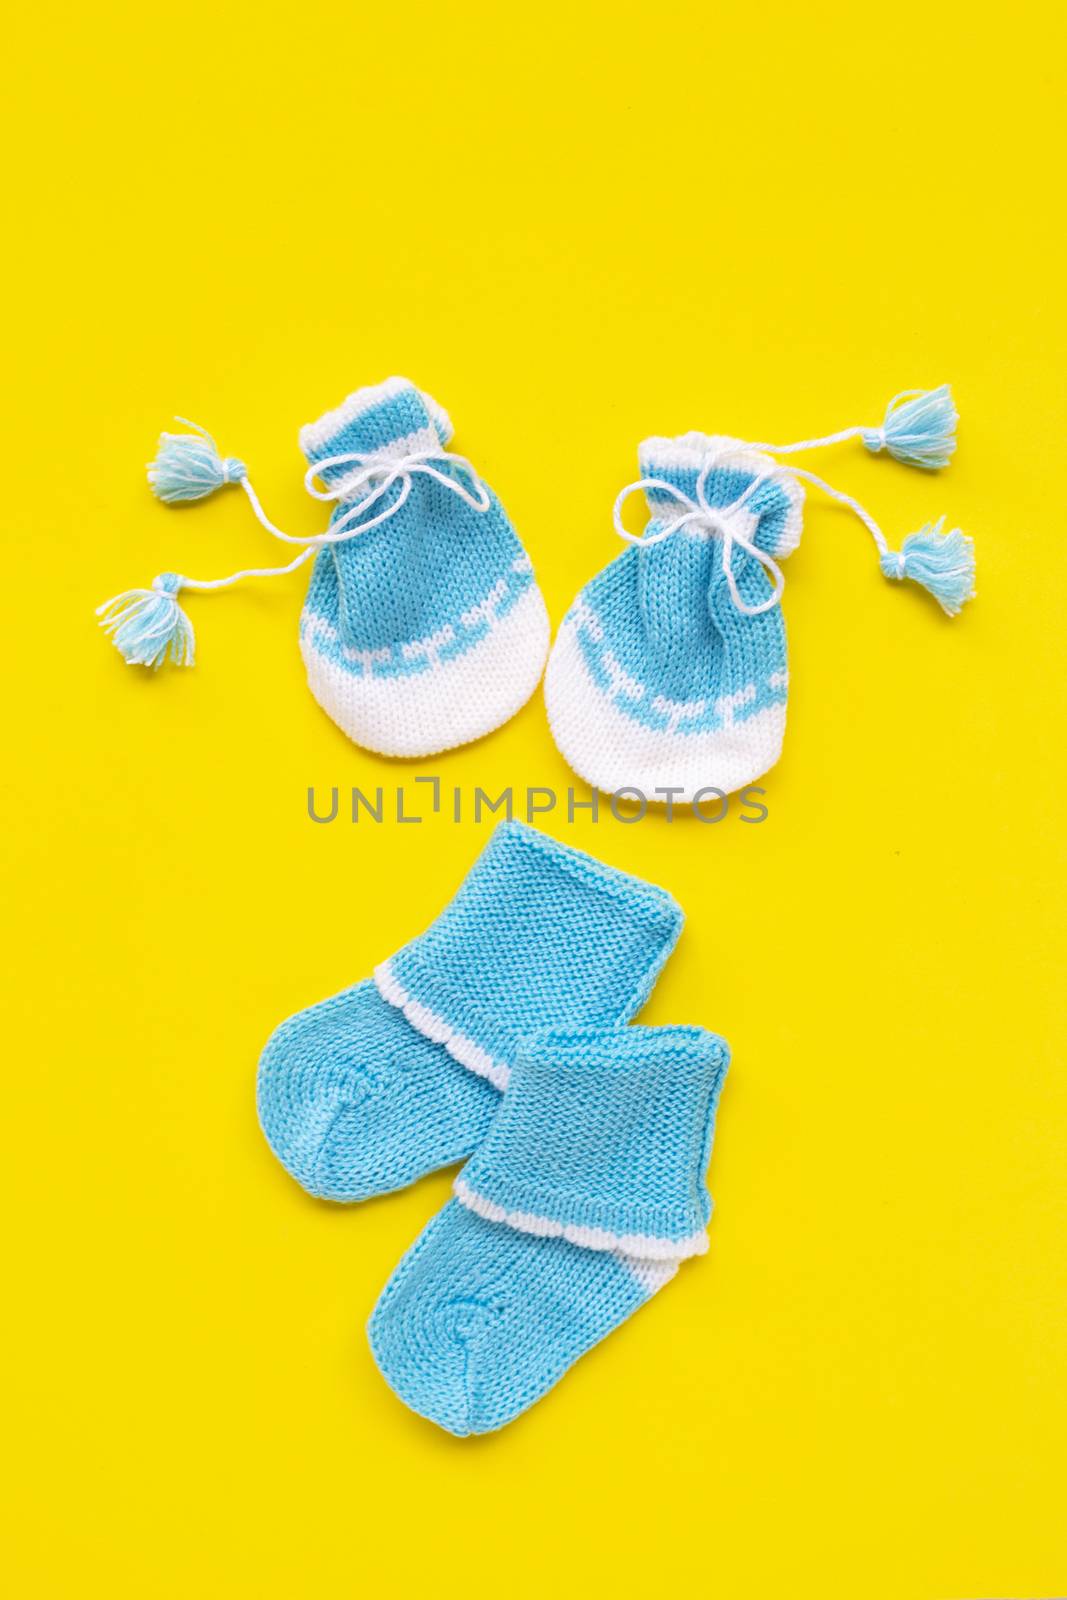 Baby gloves and socks on yellow background. by Bowonpat